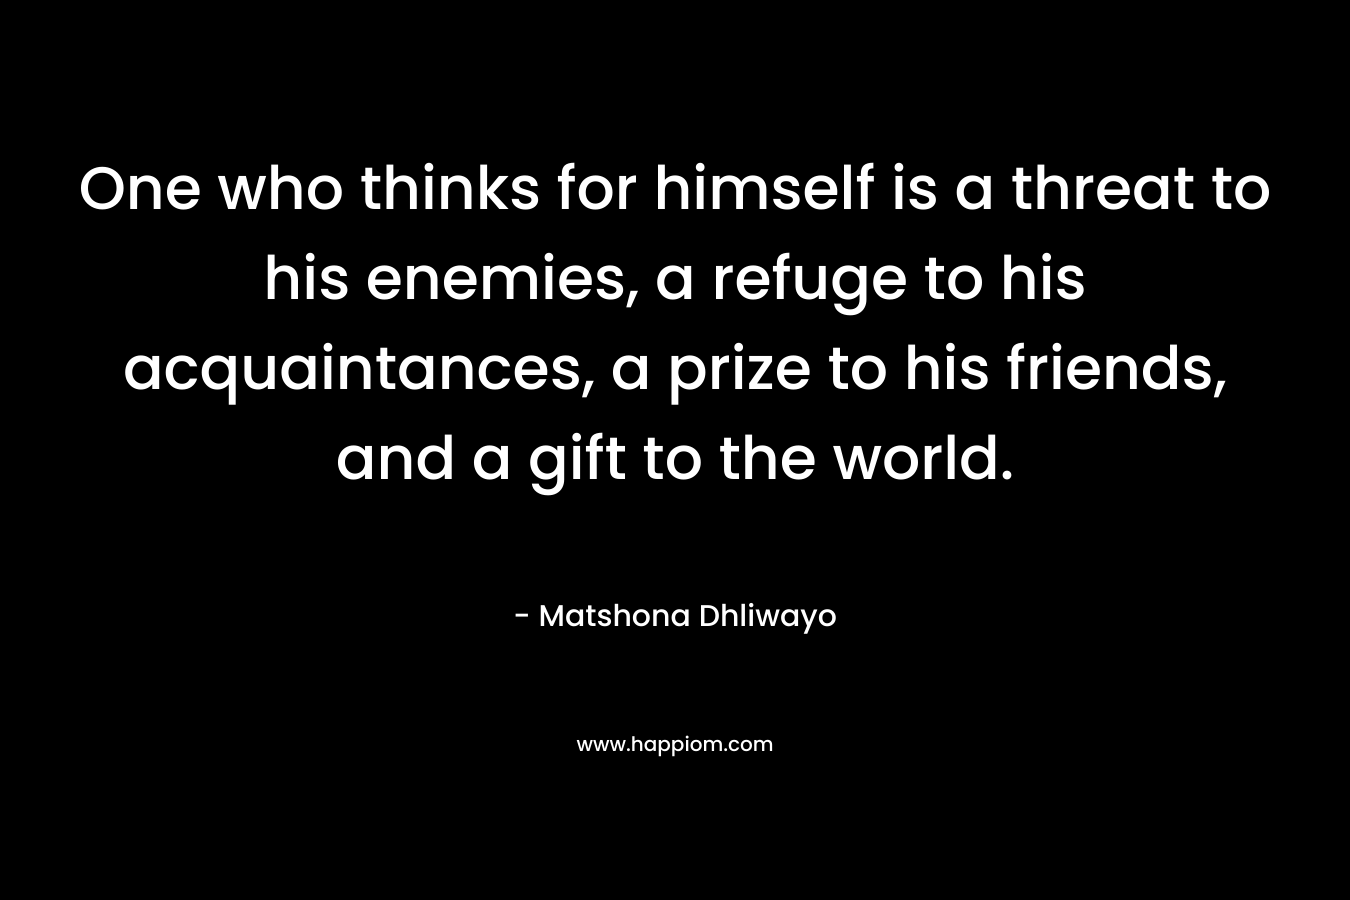 One who thinks for himself is a threat to his enemies, a refuge to his acquaintances, a prize to his friends, and a gift to the world. – Matshona Dhliwayo